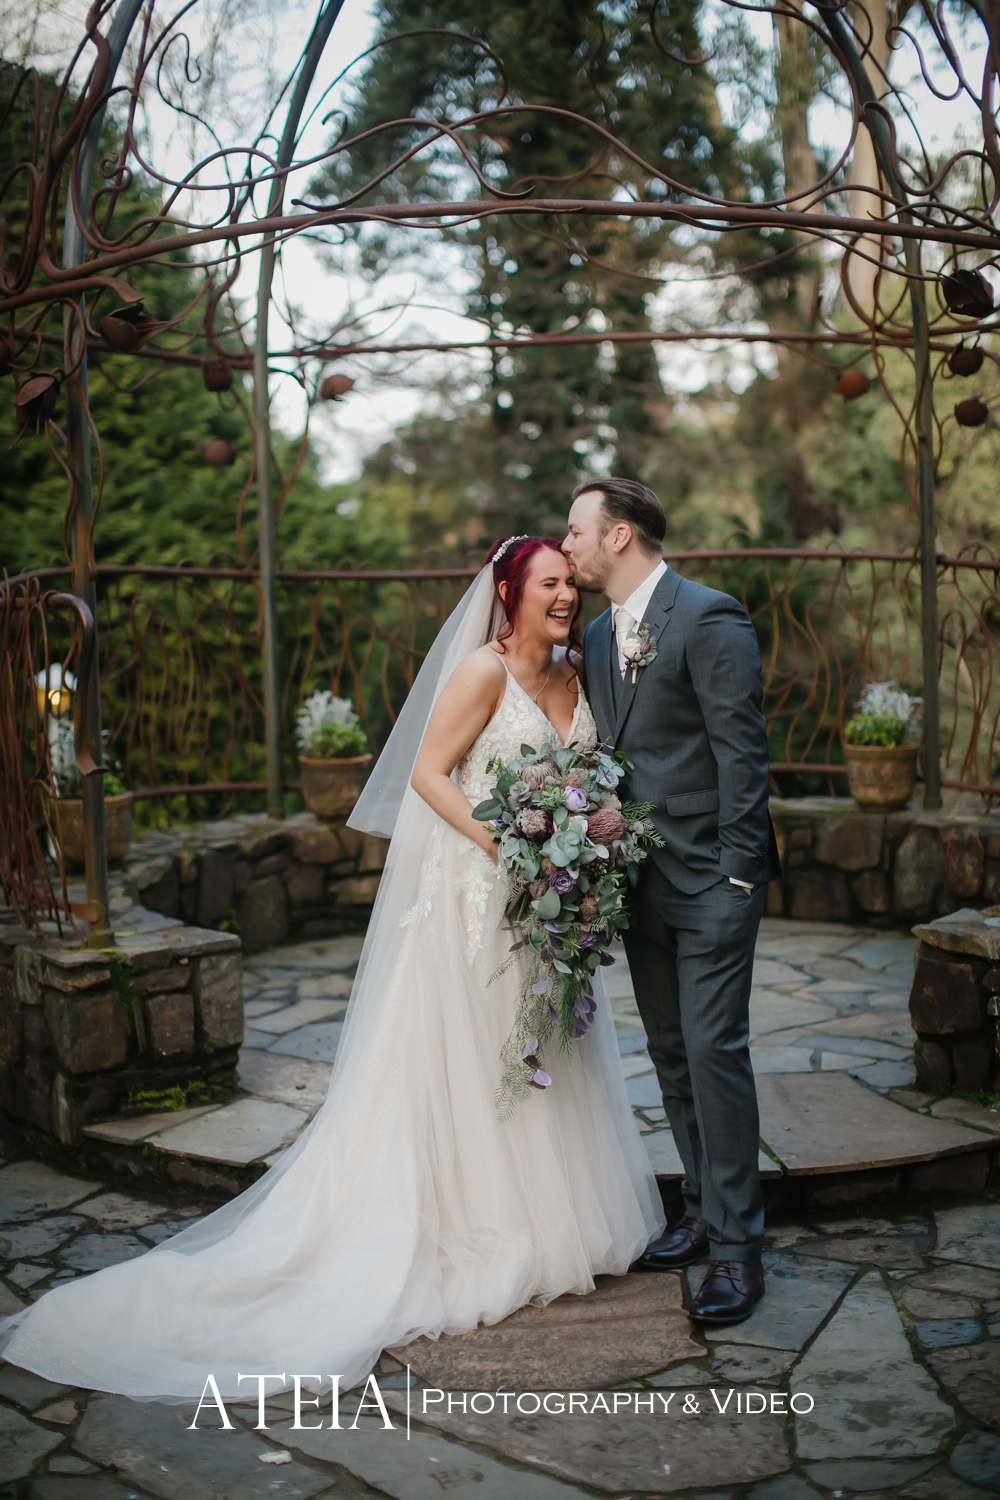 , Ashleigh and Douglas&#8217; wedding photography at Tatra Receptions Mount Dandenong captured by ATEIA Photography &#038; Video